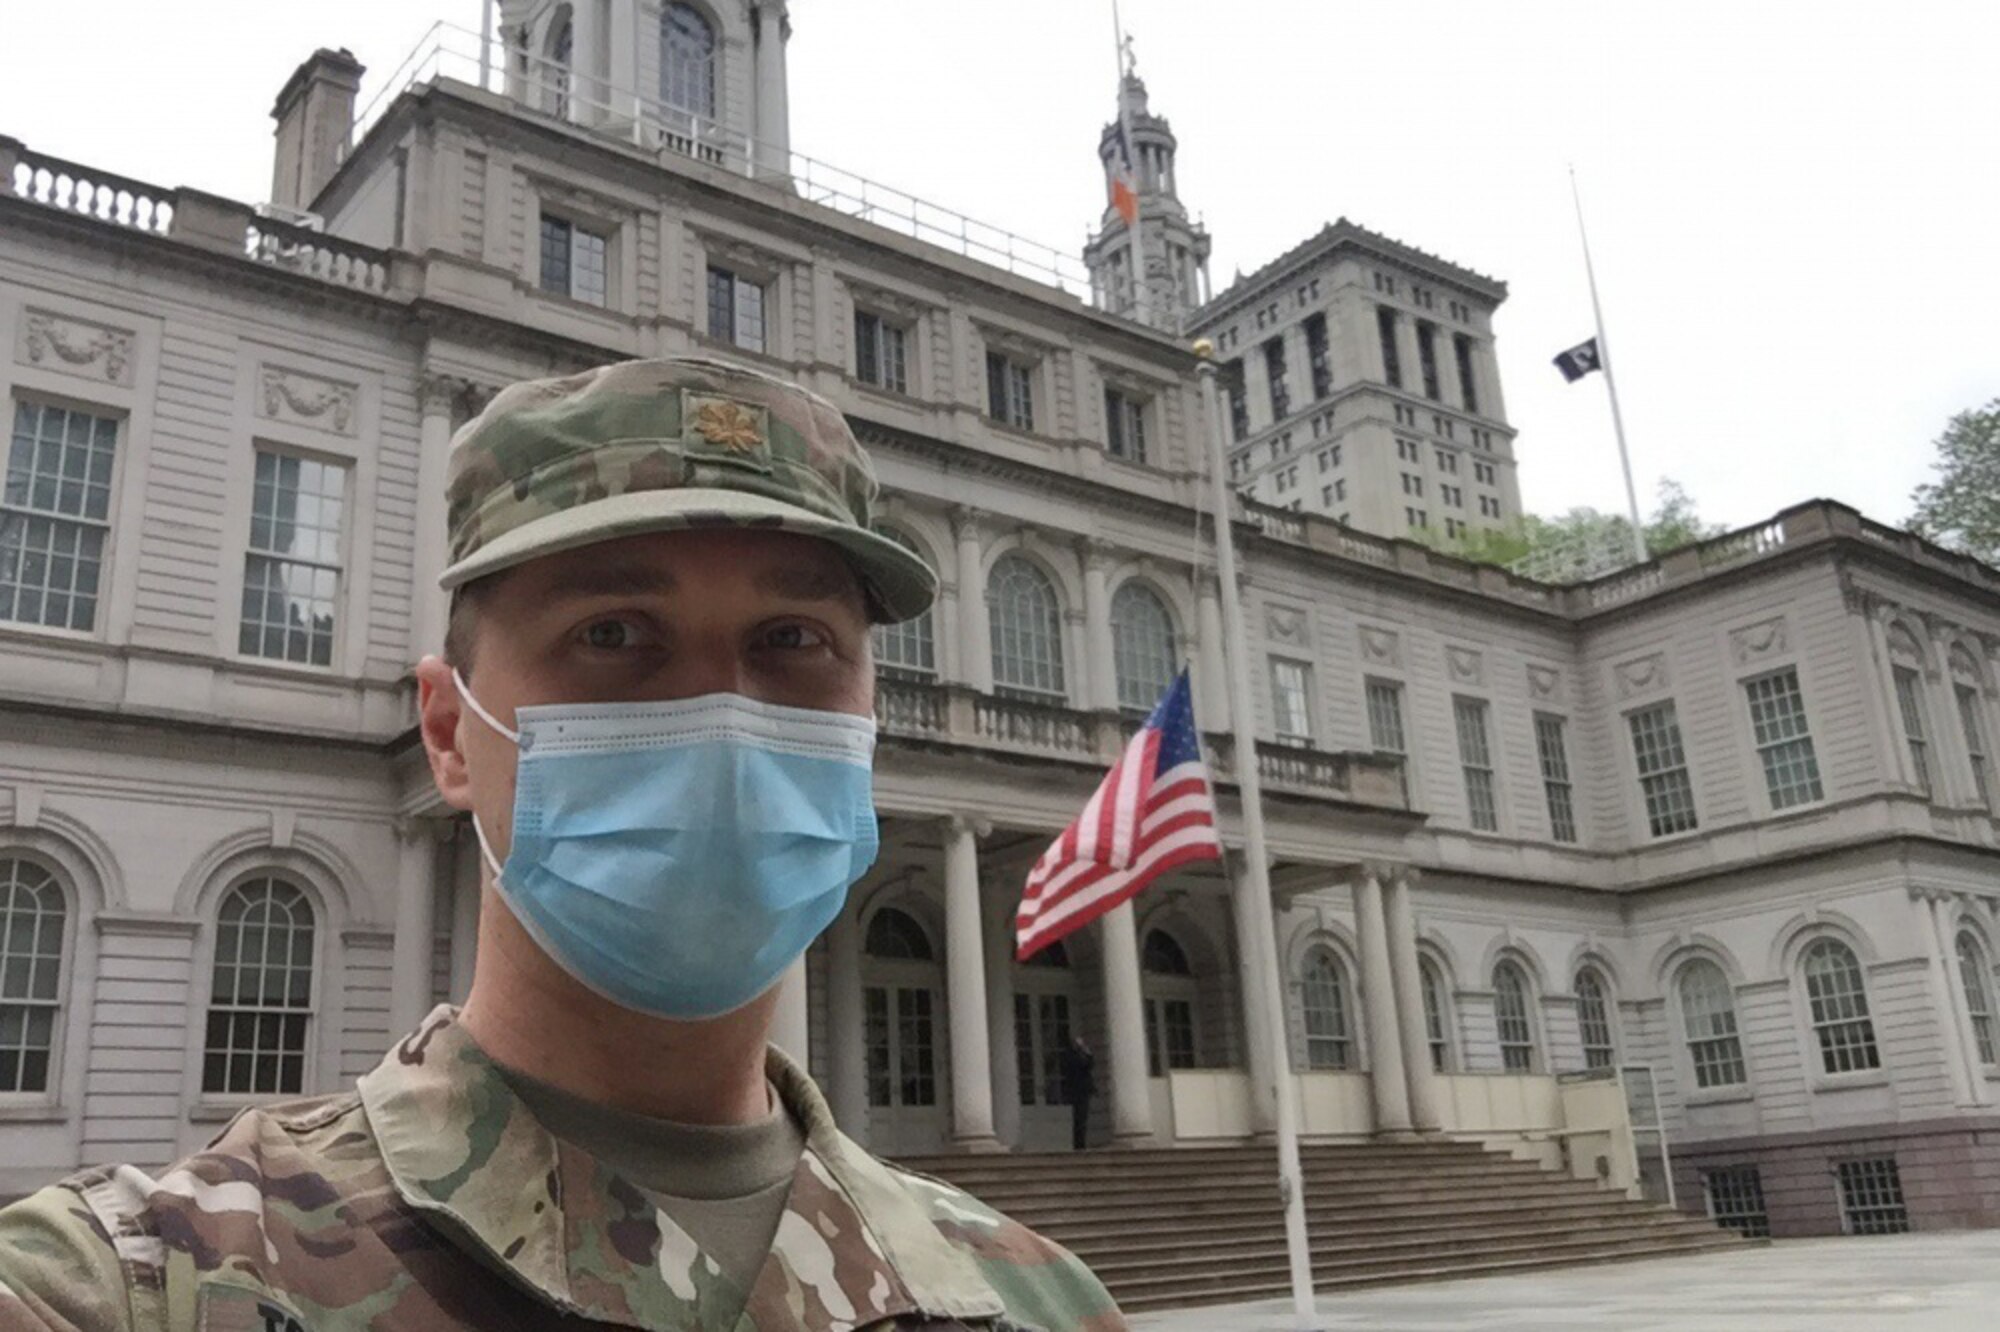 A man dressed in a military uniform and wearing a face mask poses for a photo in front of a large building where the flag is flying at half-staff.